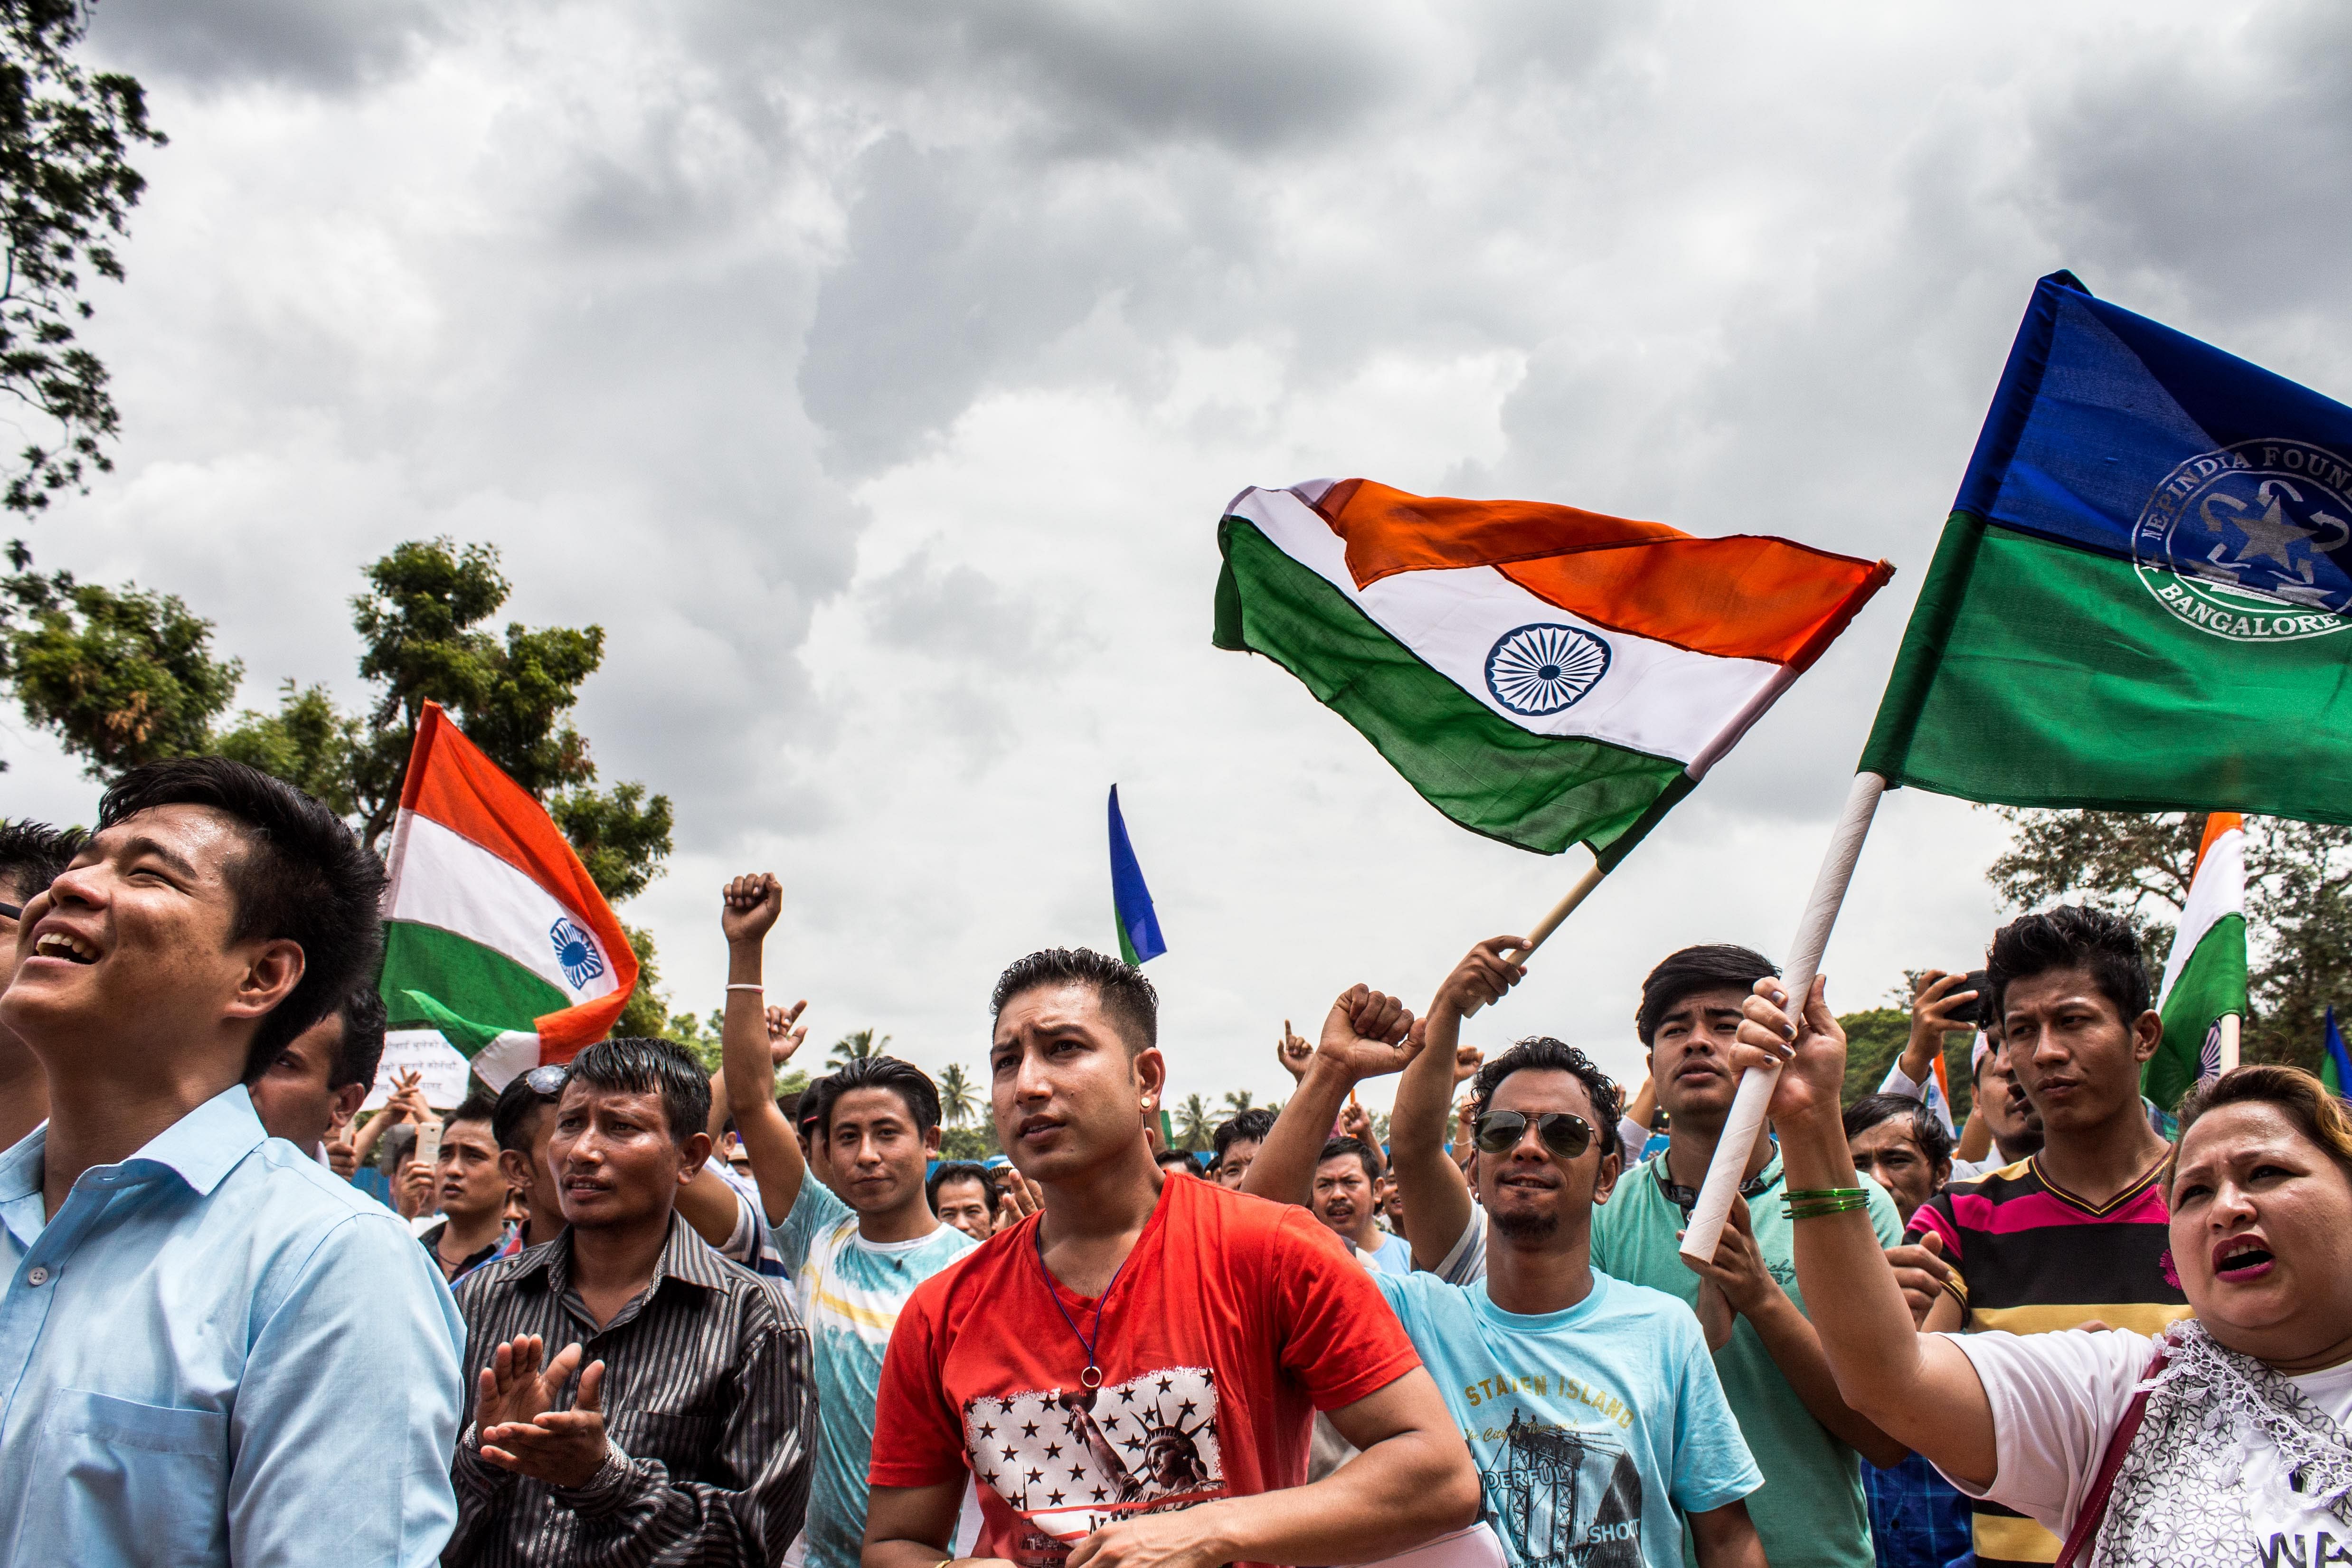 Gorkhaland protest in Bengaluru, photographed by Vaishnavi as part of her project on dissent.